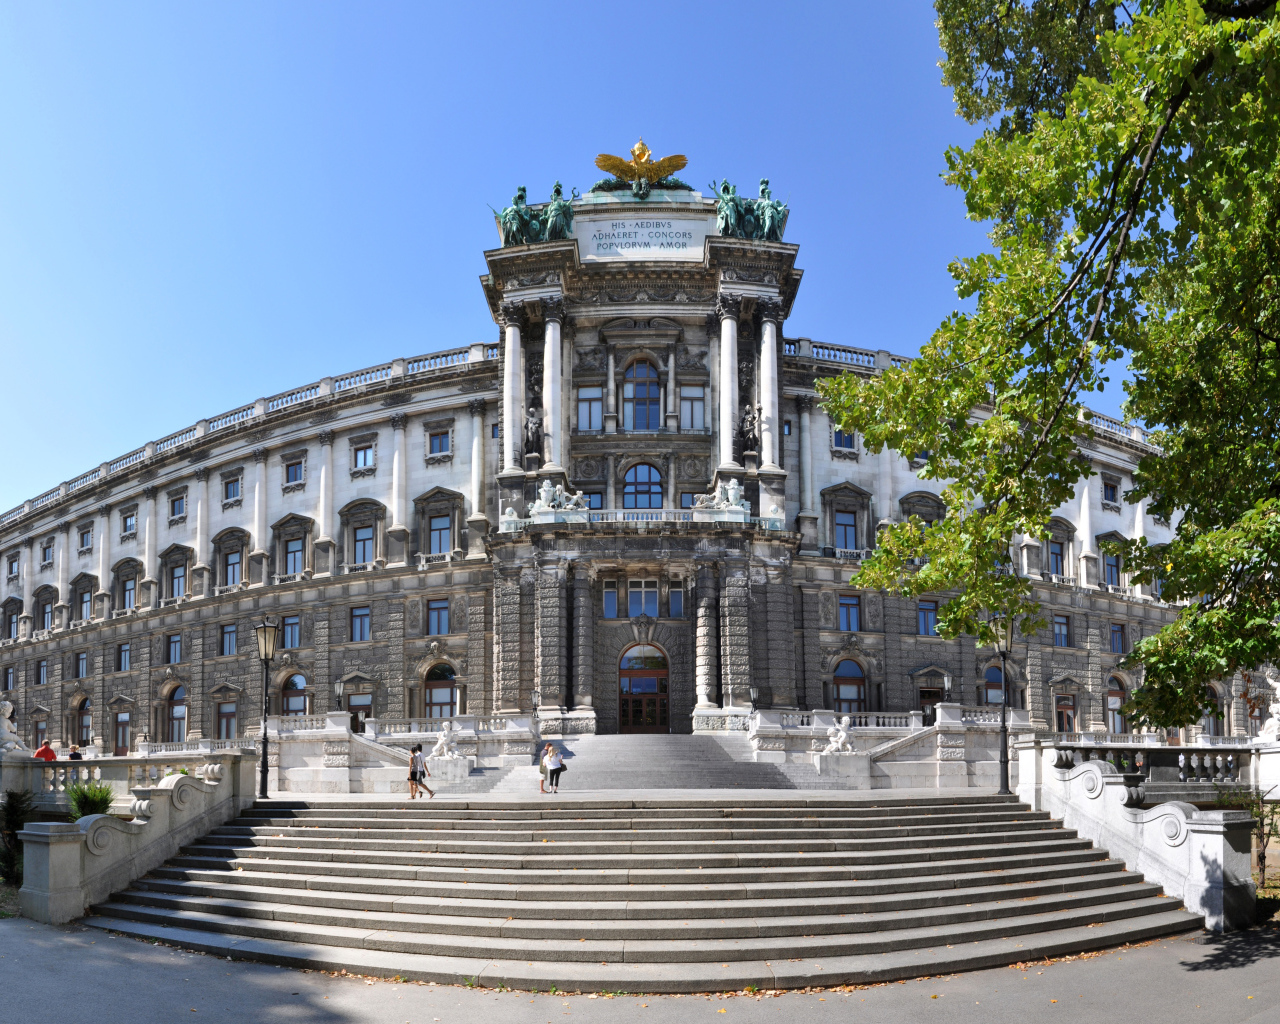 The building of the Hofburg residence, Vienna. Austria